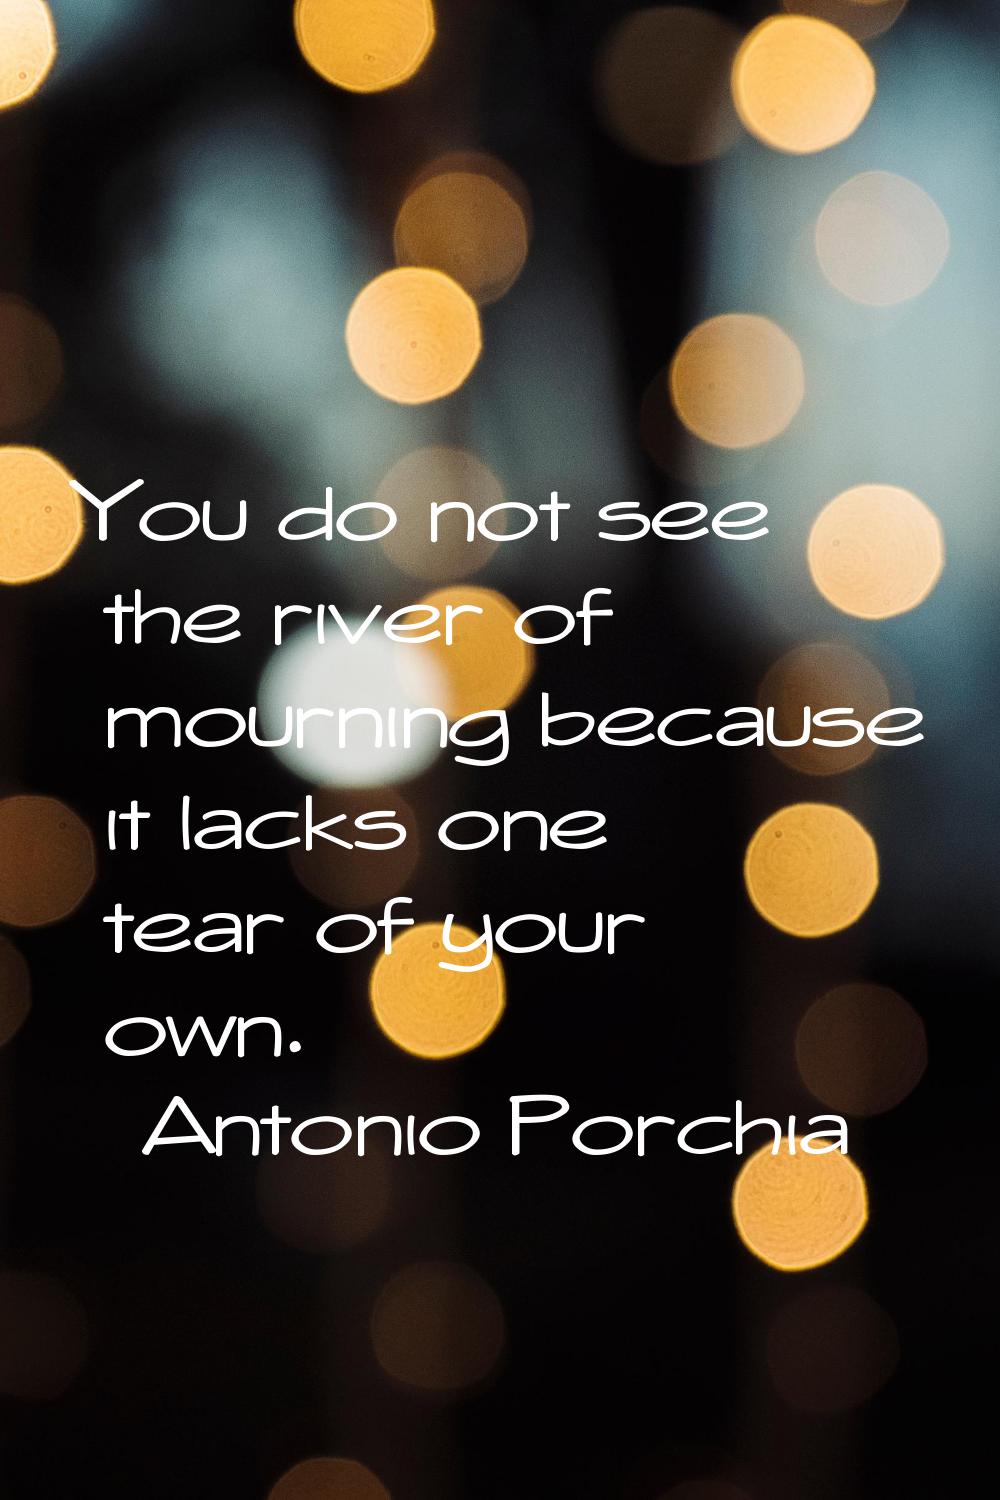 You do not see the river of mourning because it lacks one tear of your own.